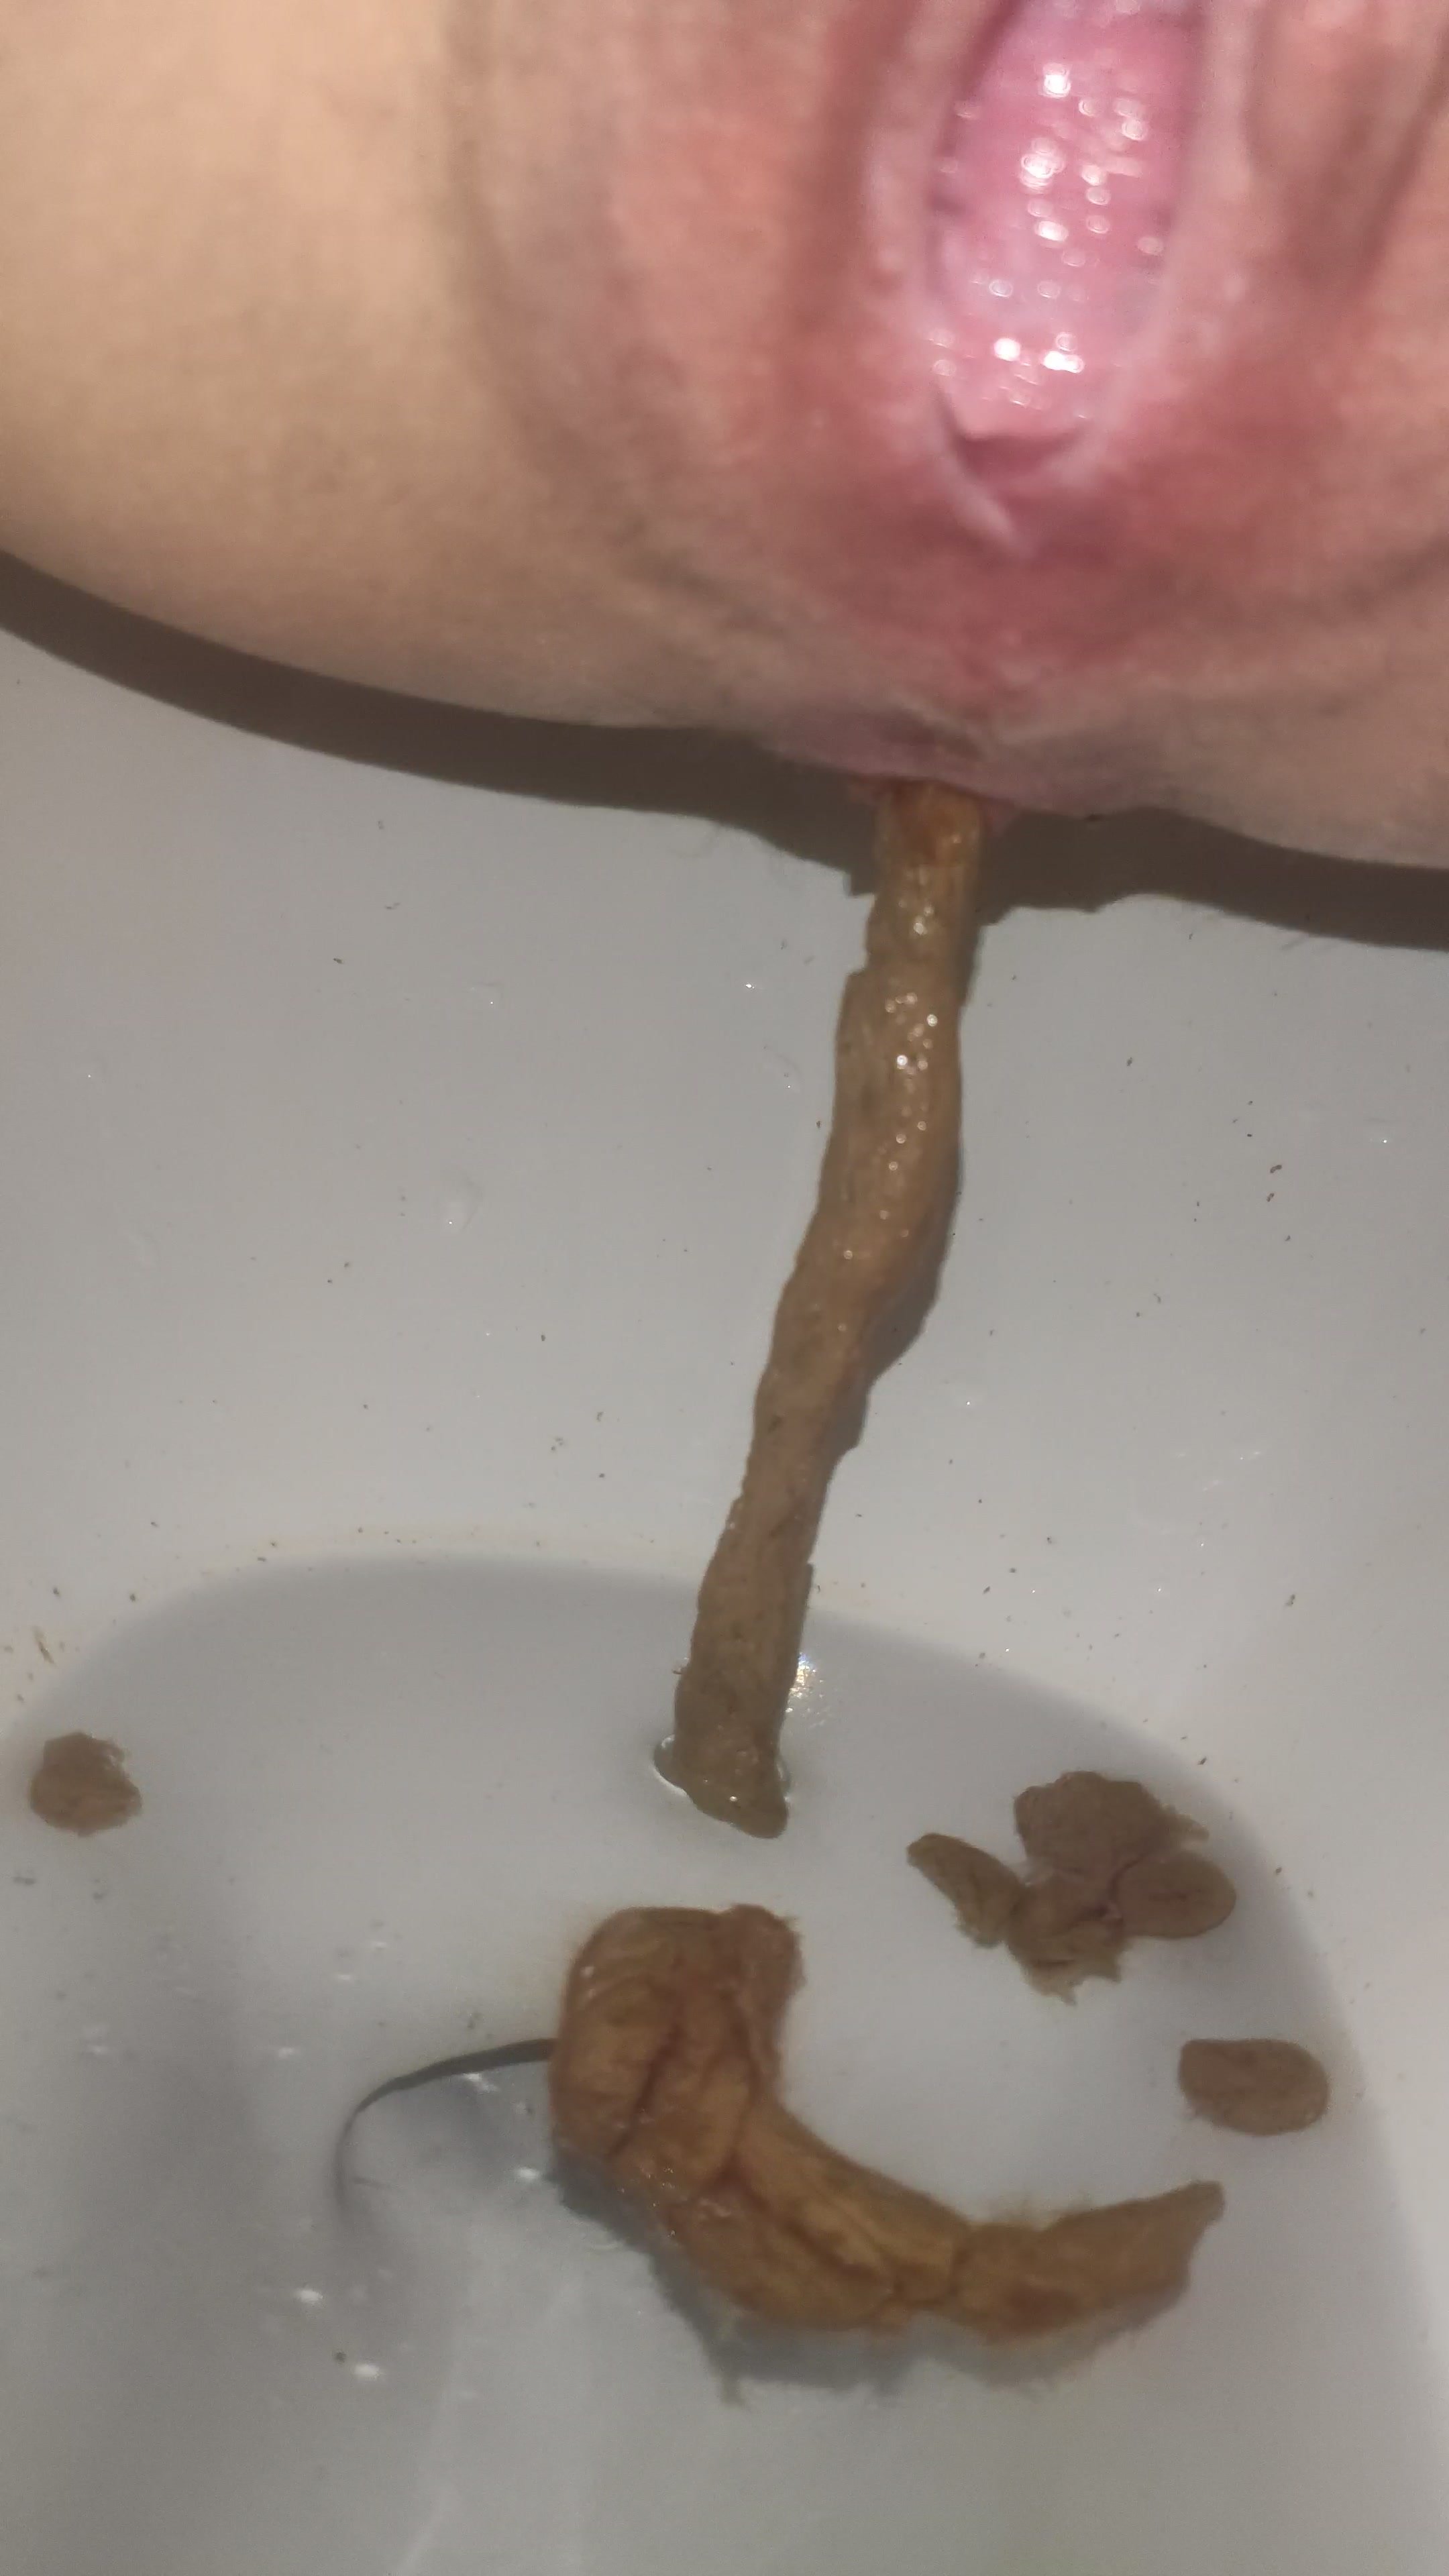 My soft shit after lunch